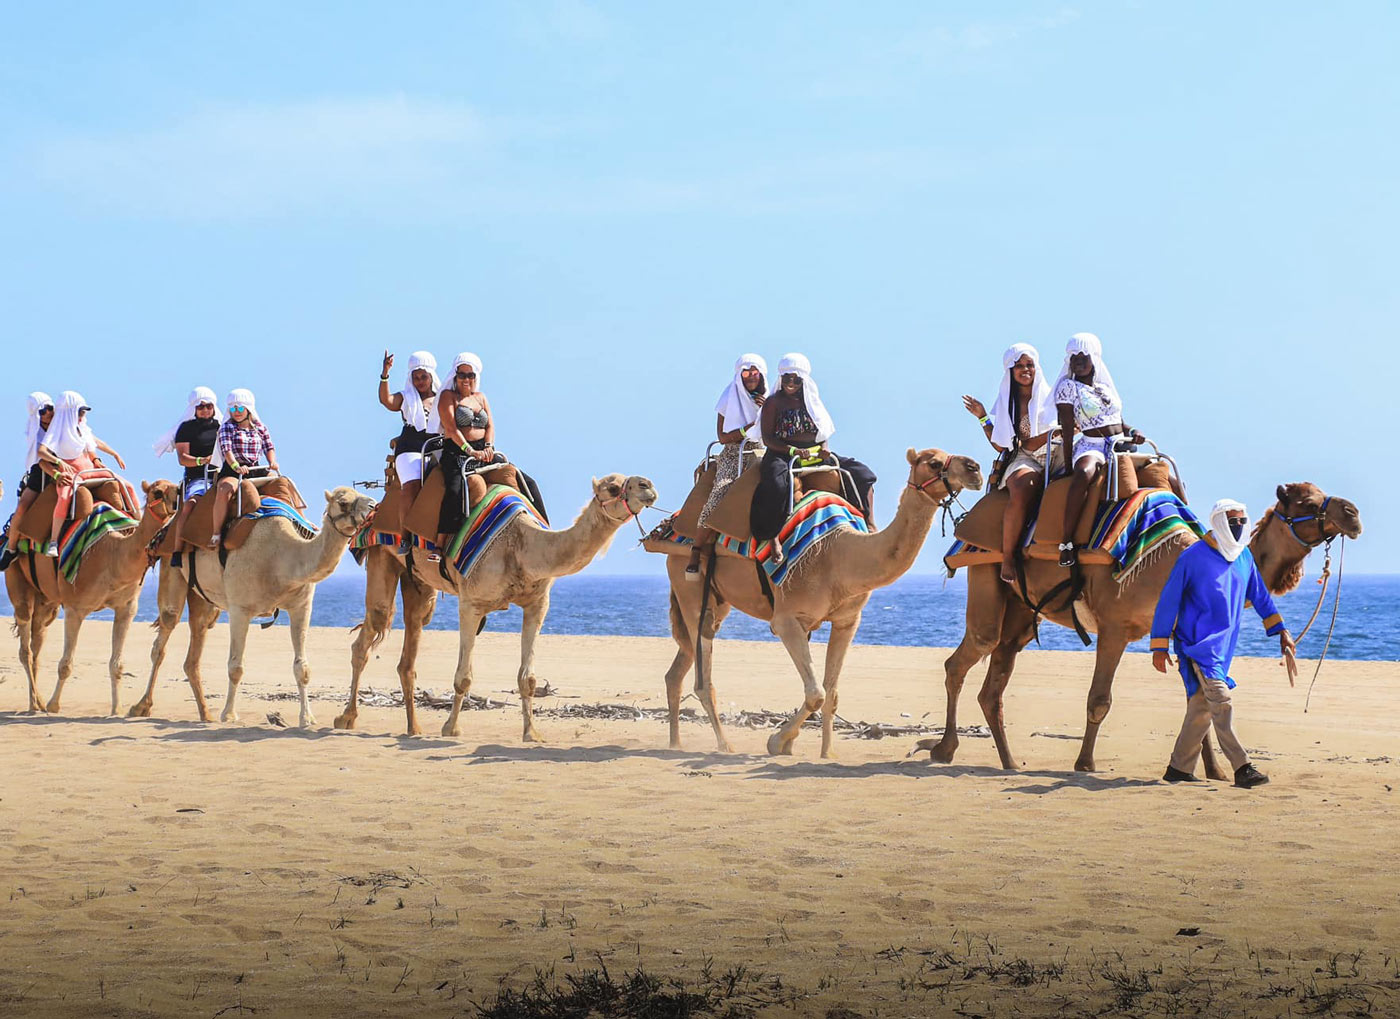 Visitors ride camels on the beach in Cabo San Lucas